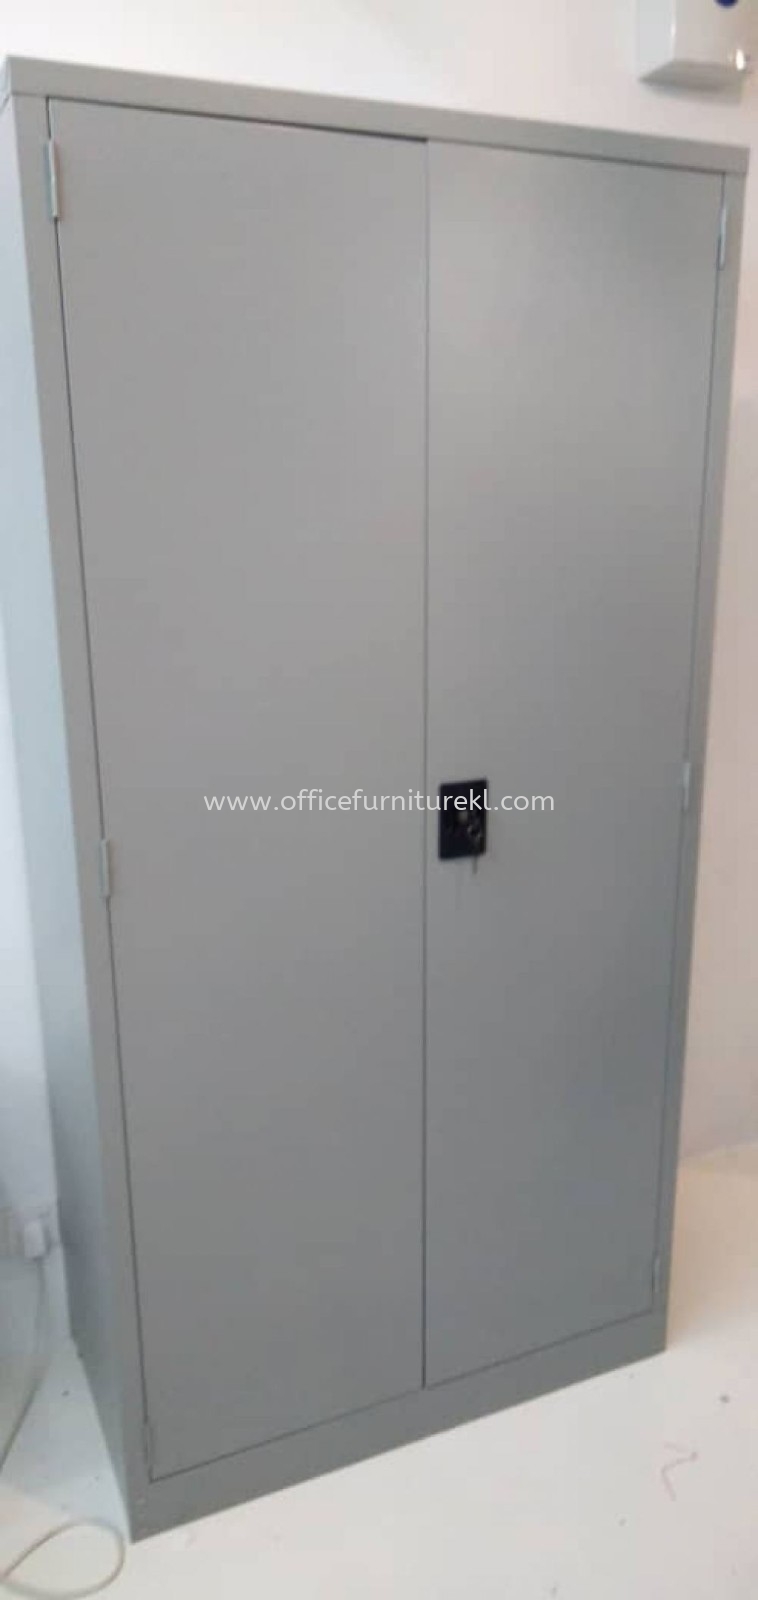 FREE DELIVERY & INSTALLATION WRITING OFFICE TABLE GT 157 l SIDE OFFICE CABINET GS 303 l MOBILE OFFICE PEDESTAL 3D GM 3 l OFFICE FURNITURE l BUKIT JALIL l KUALA LUMPUR l TOP 10 TOP SELLING